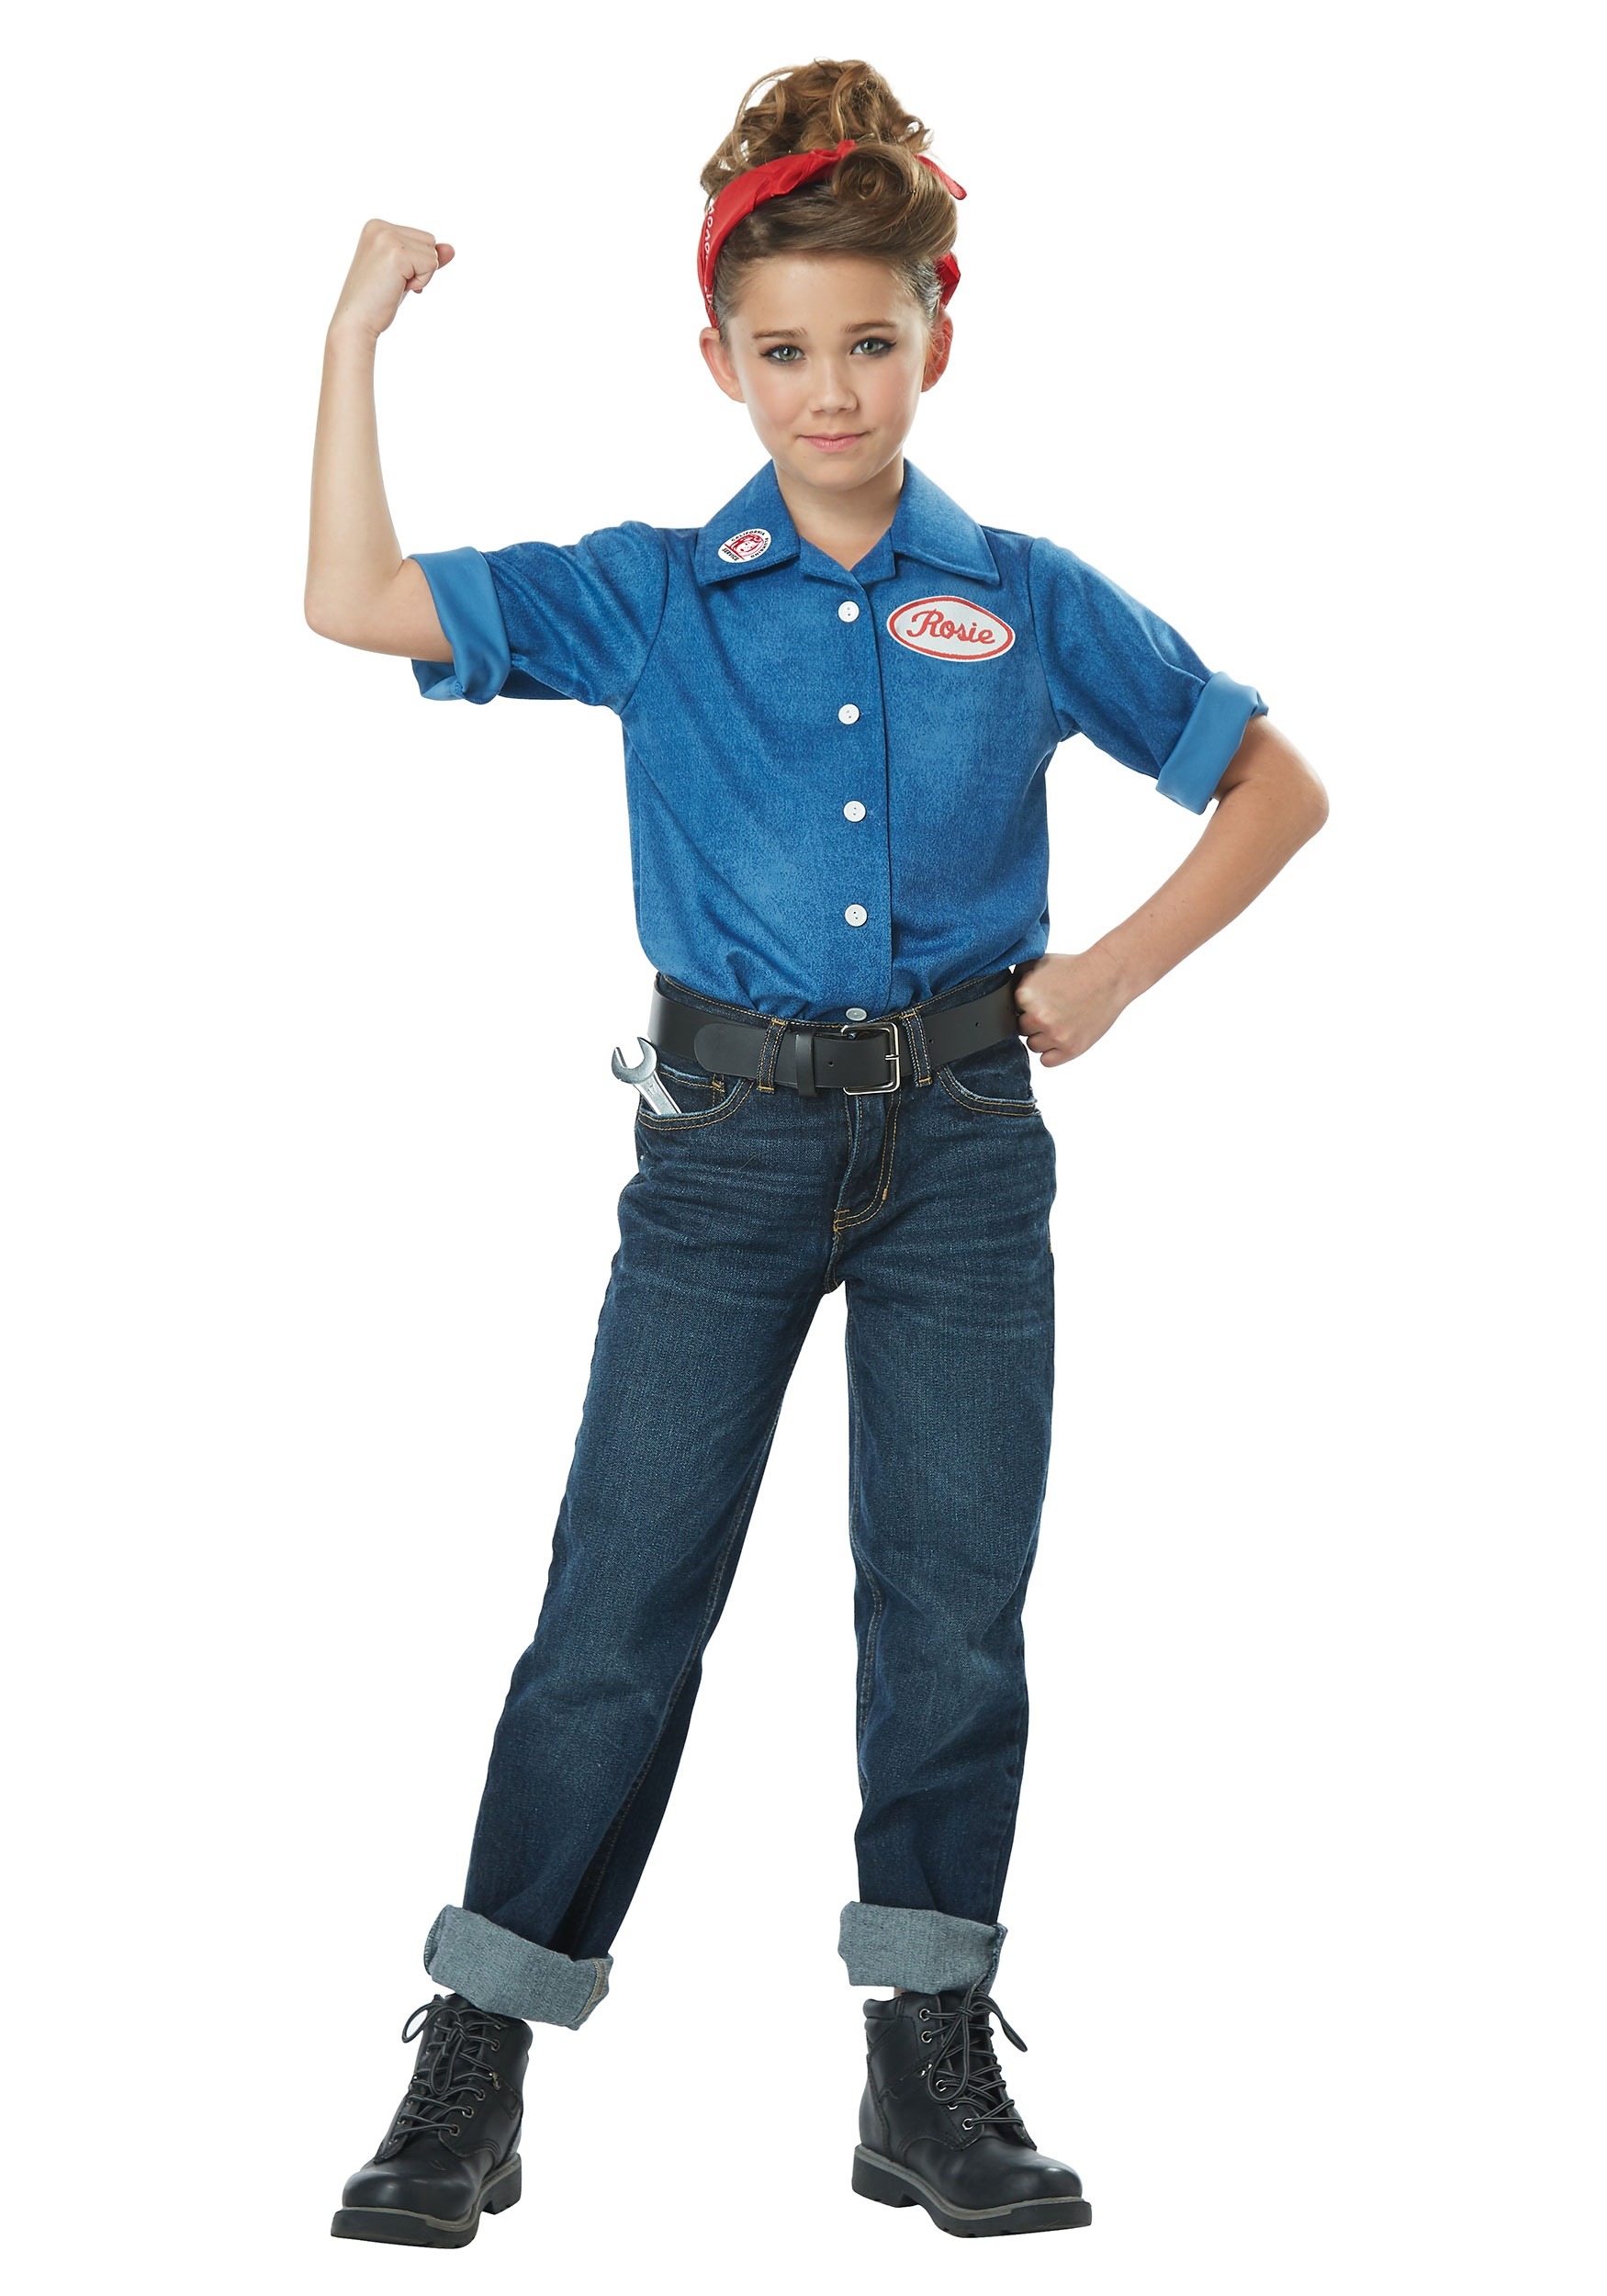 Photos - Fancy Dress California Costume Collection Rosie the Riveter Girl's Costume Blue/Re 